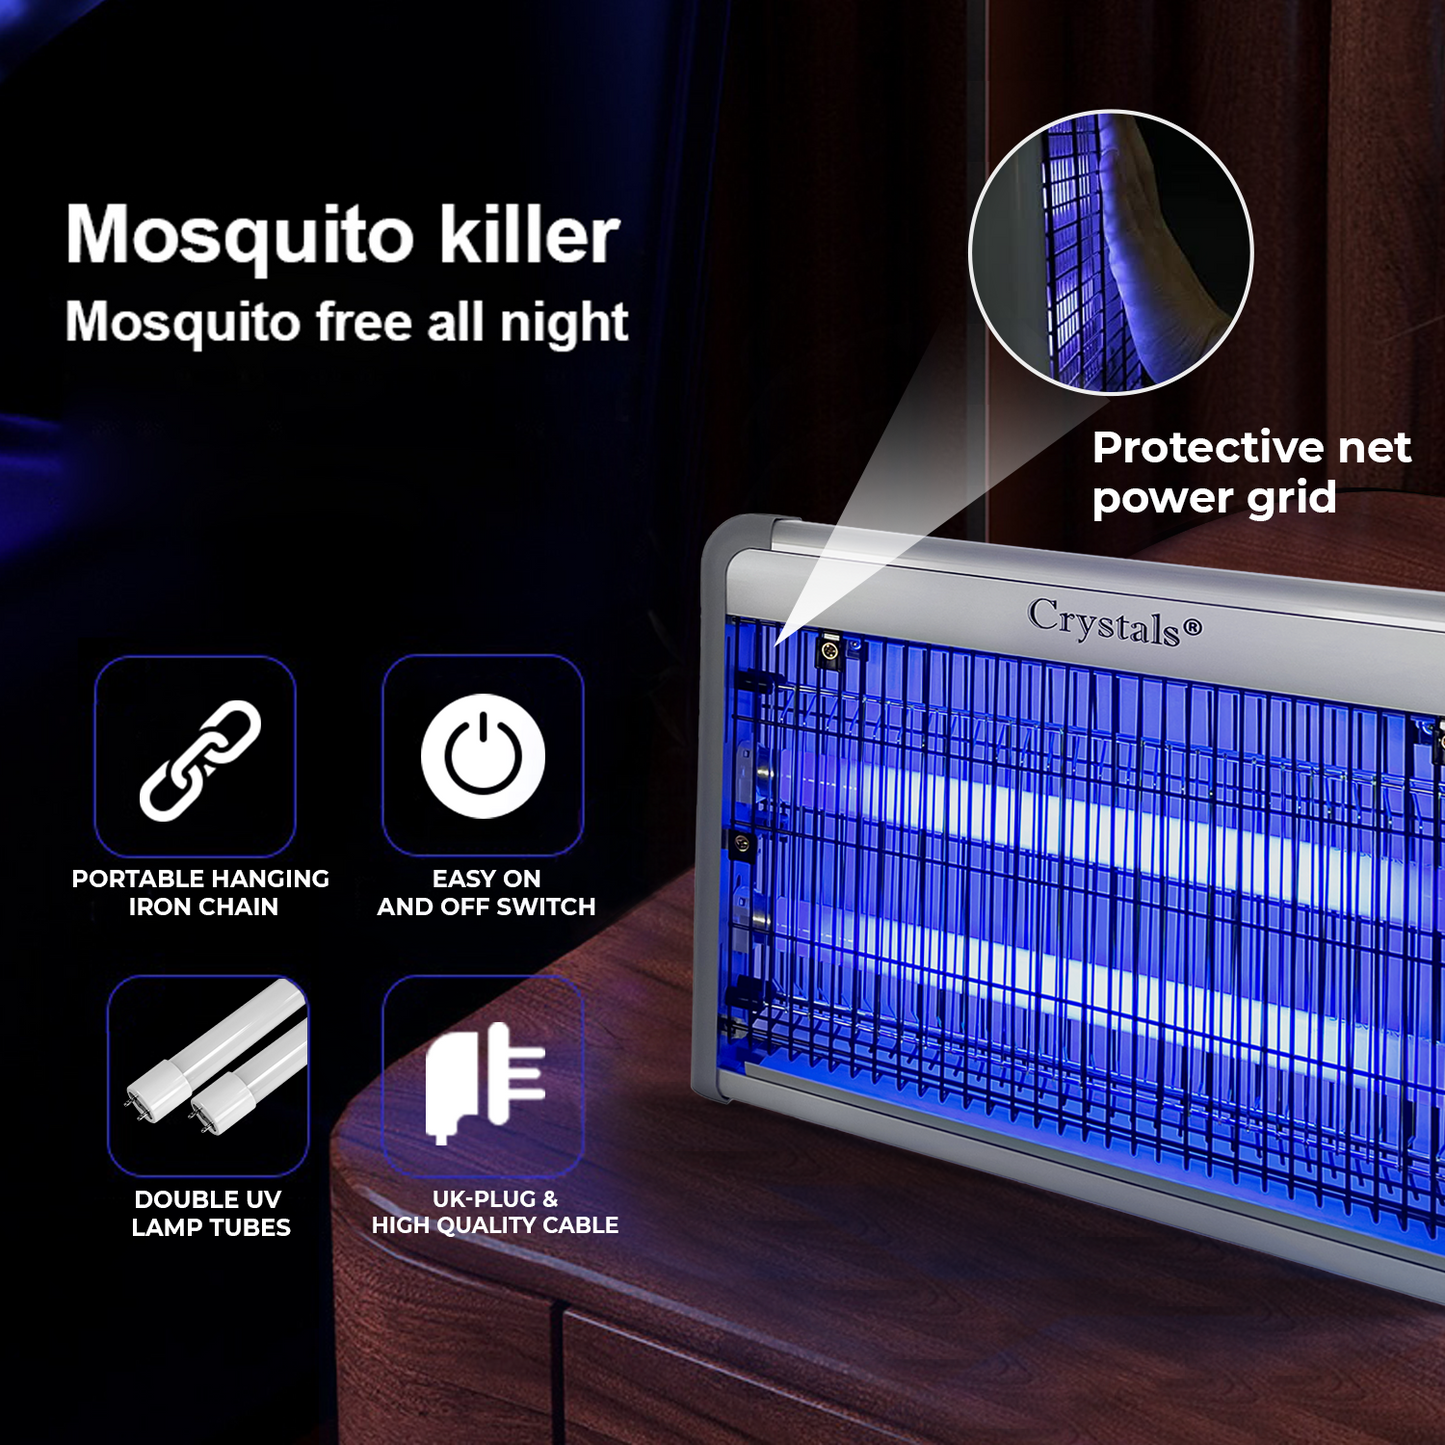 20W Electric Bug Zapper by Crystals